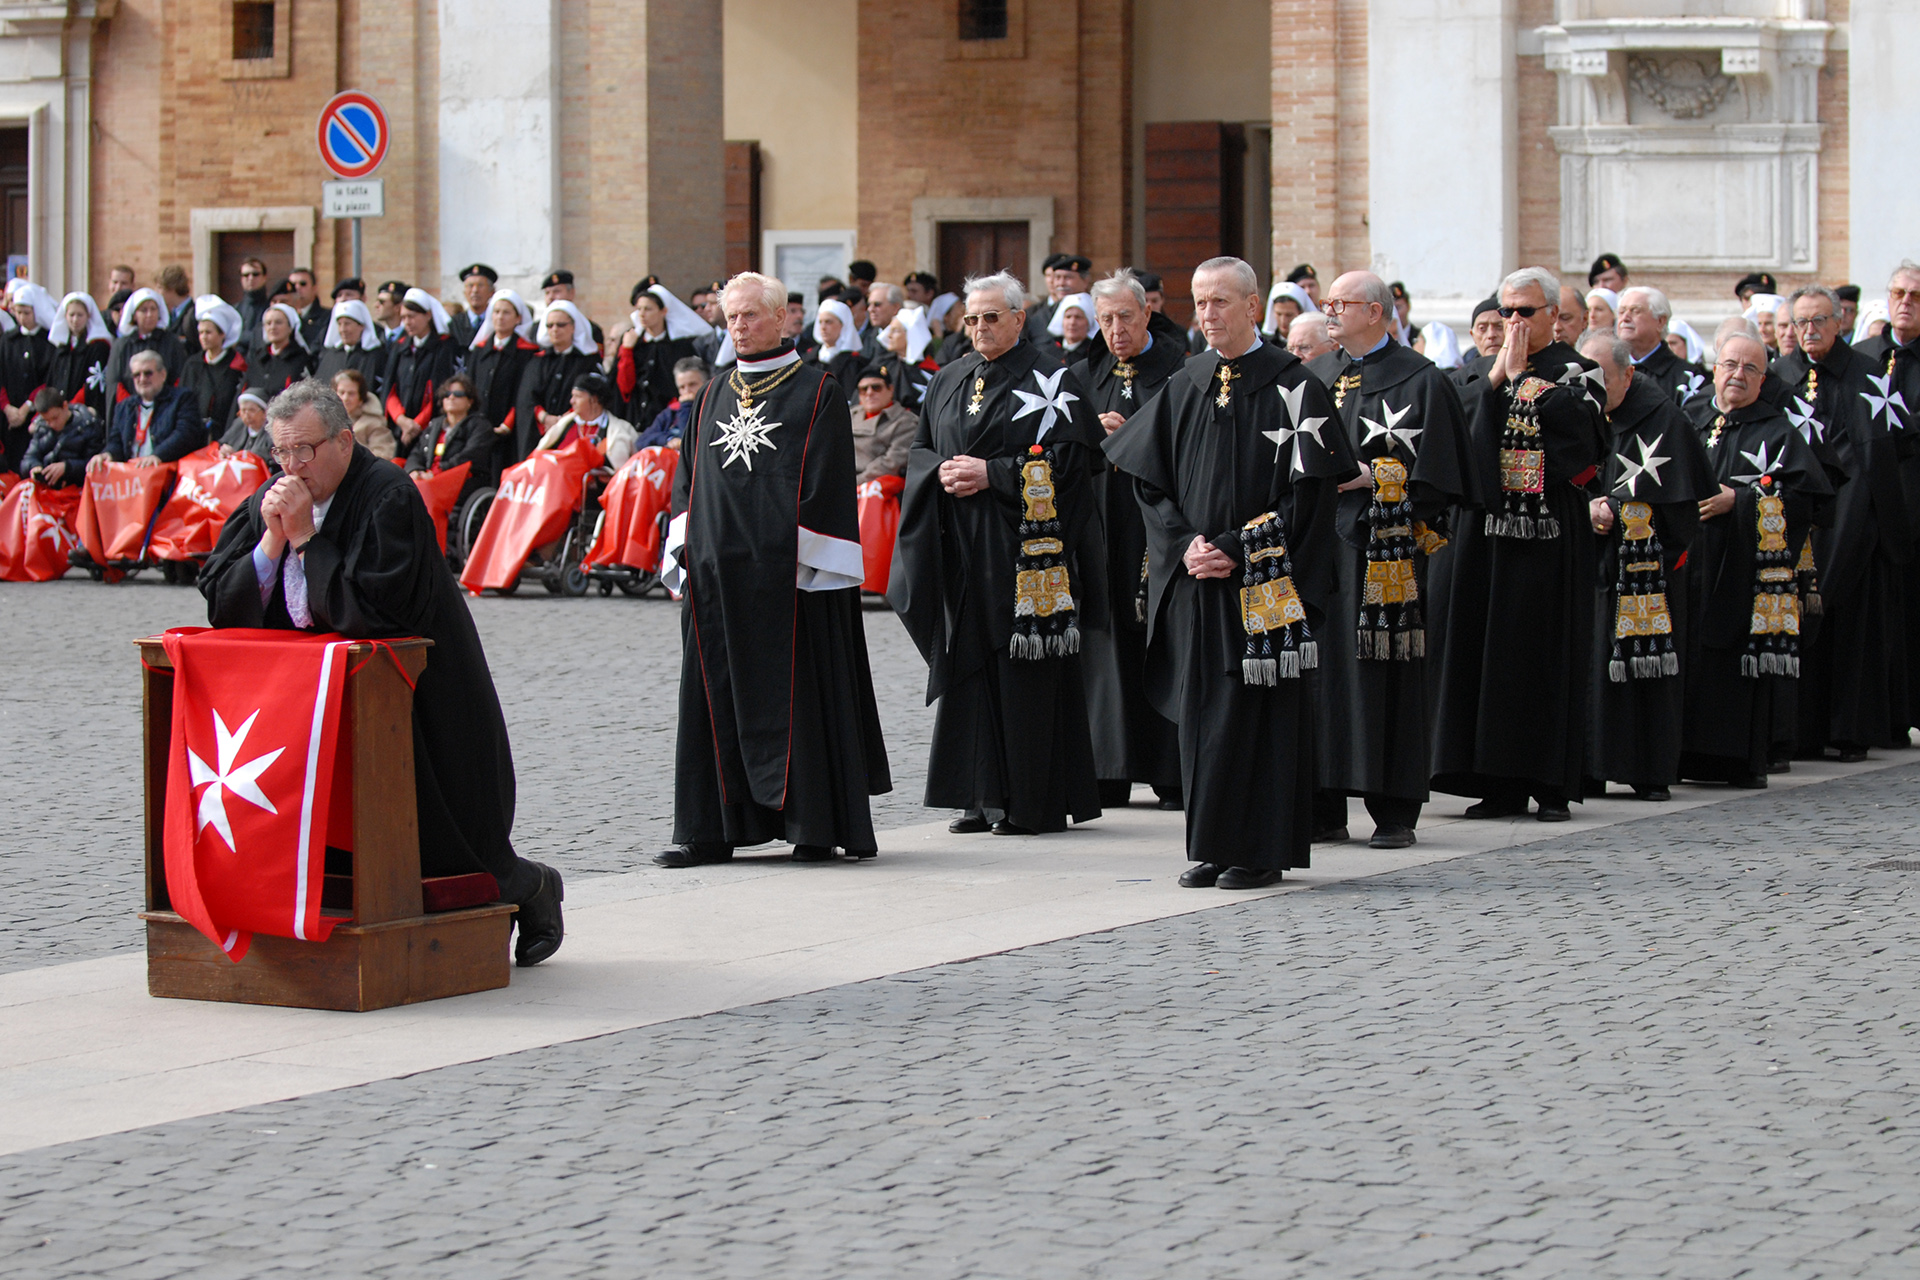 The Grand Master and the Order in pilgrimage to Loreto